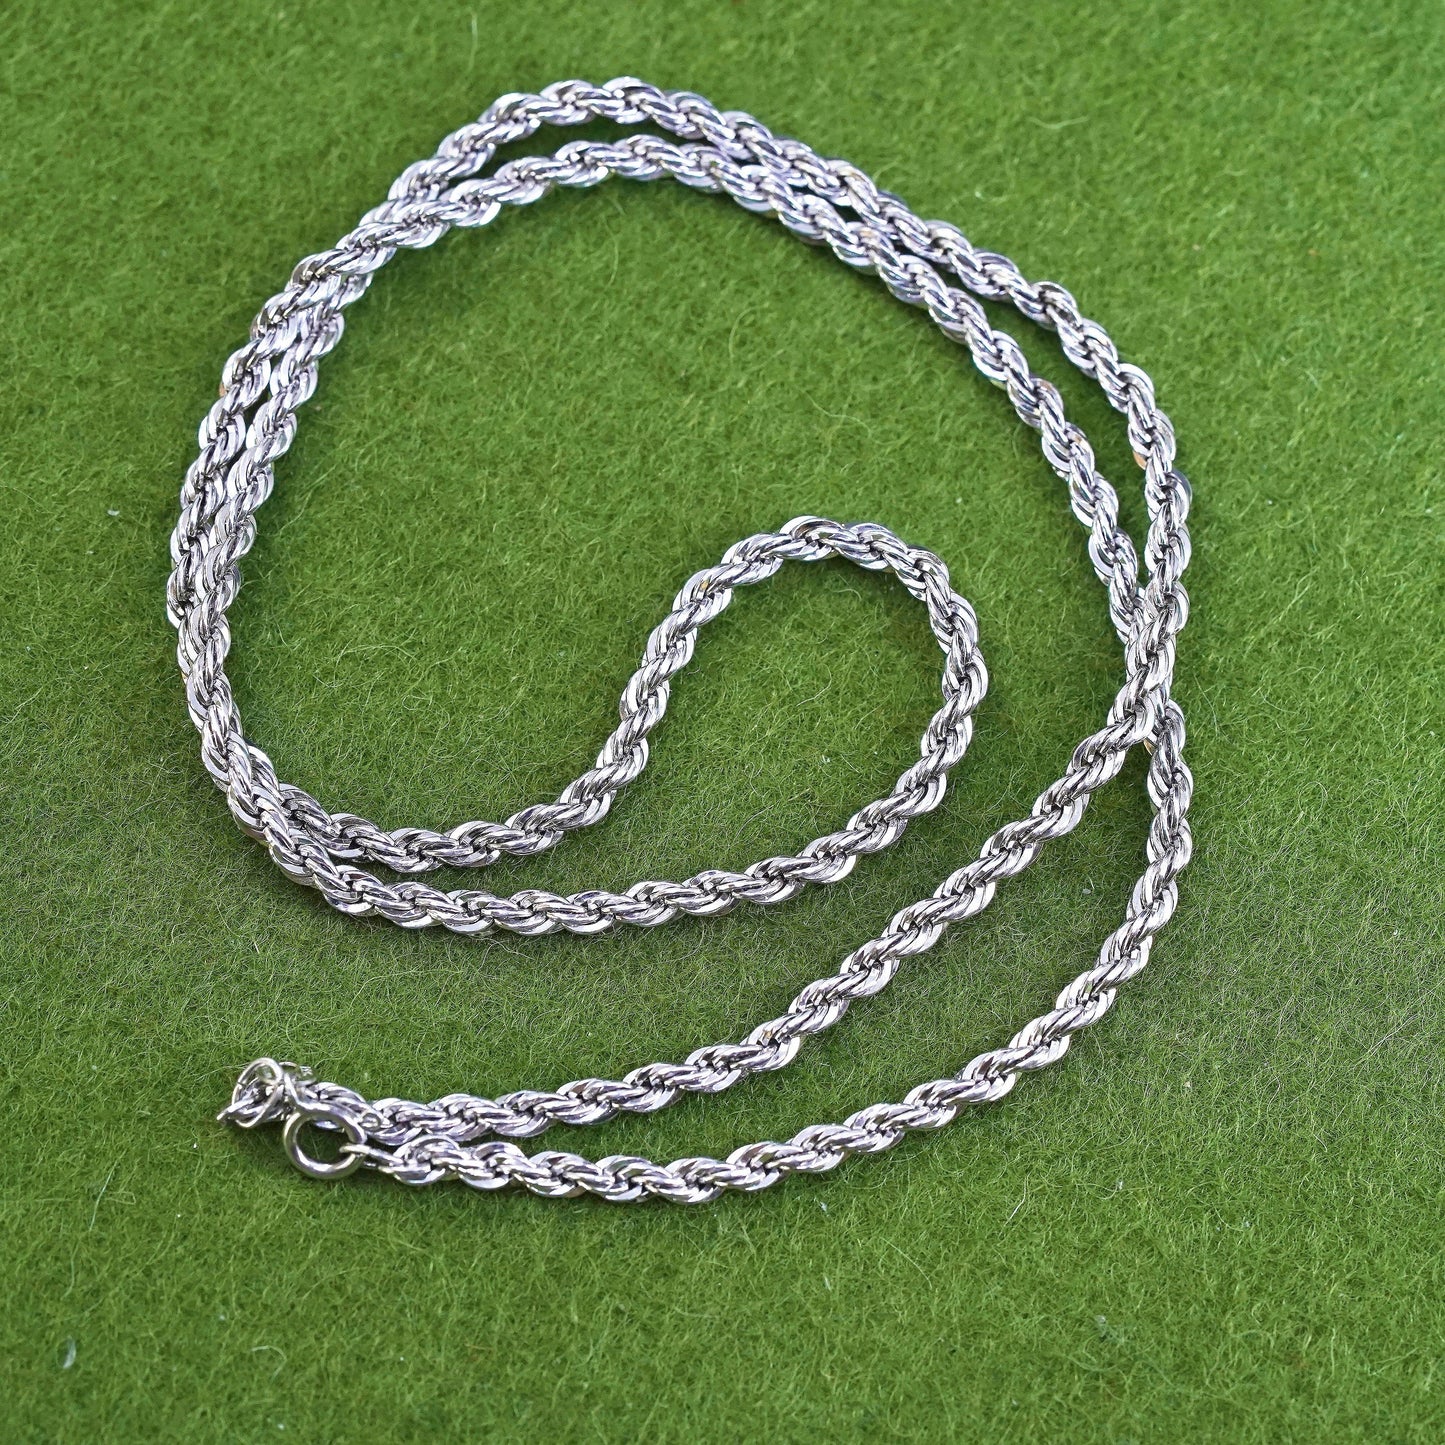 20”, 3mm, vintage Sterling silver necklace, 925 rope chain